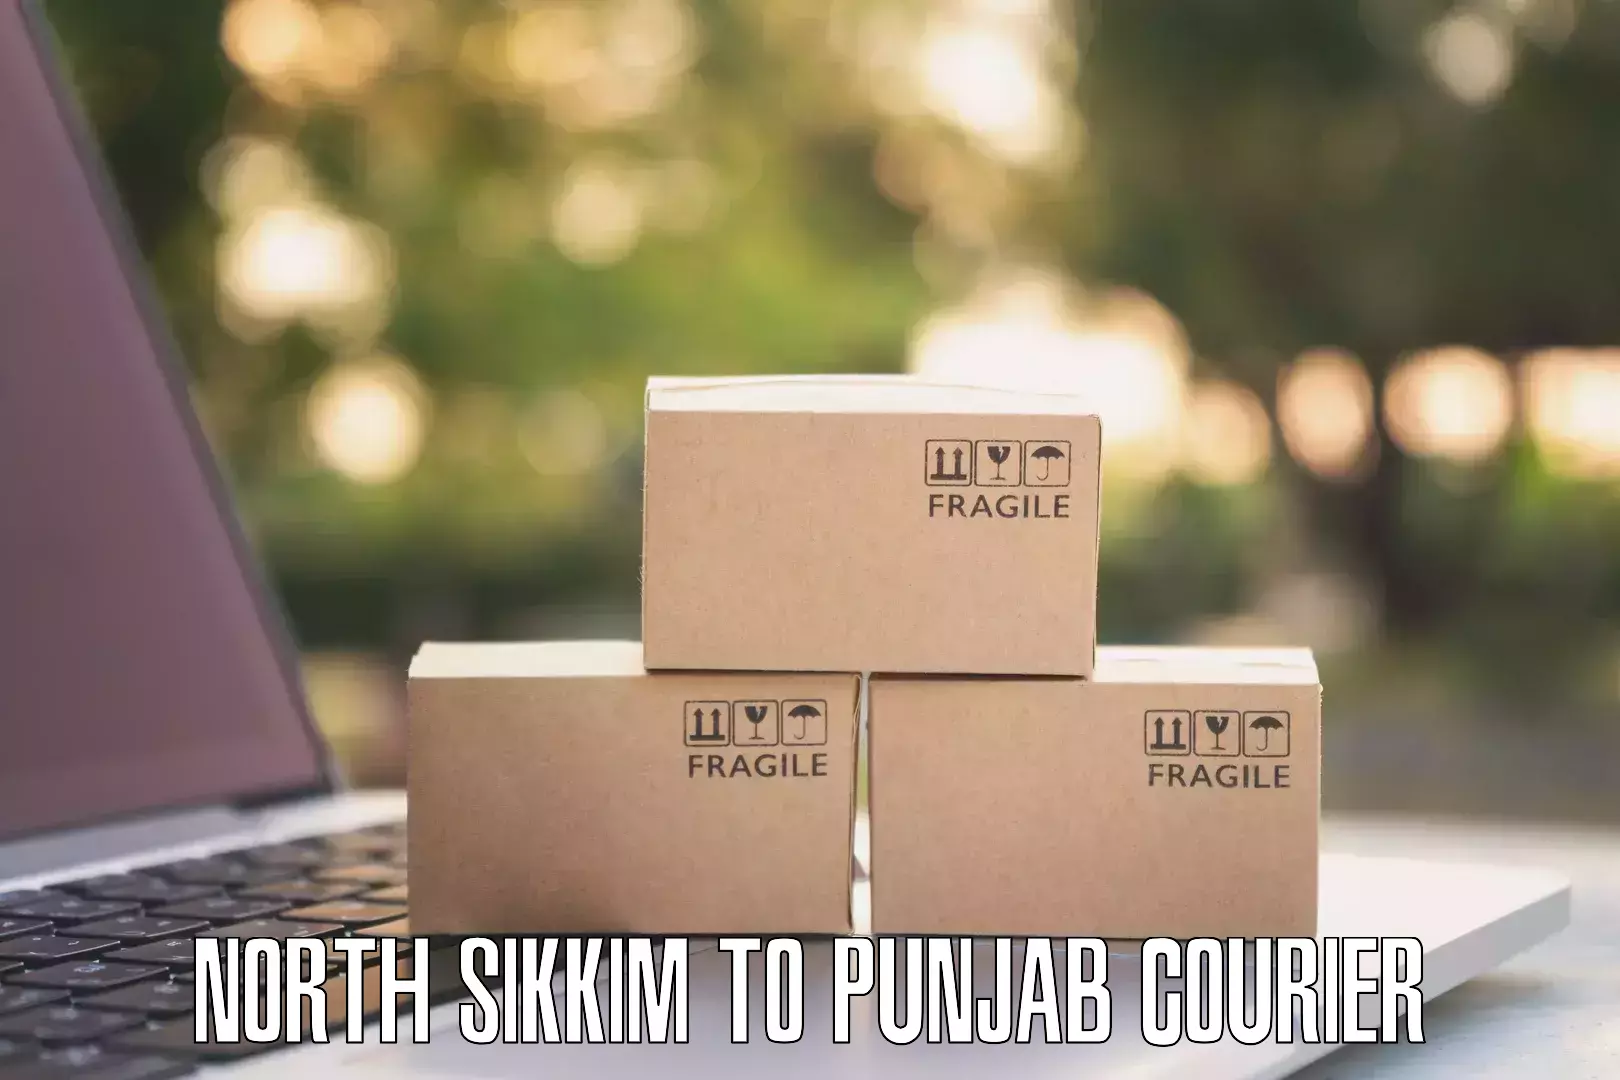 Personal parcel delivery in North Sikkim to Central University of Punjab Bathinda